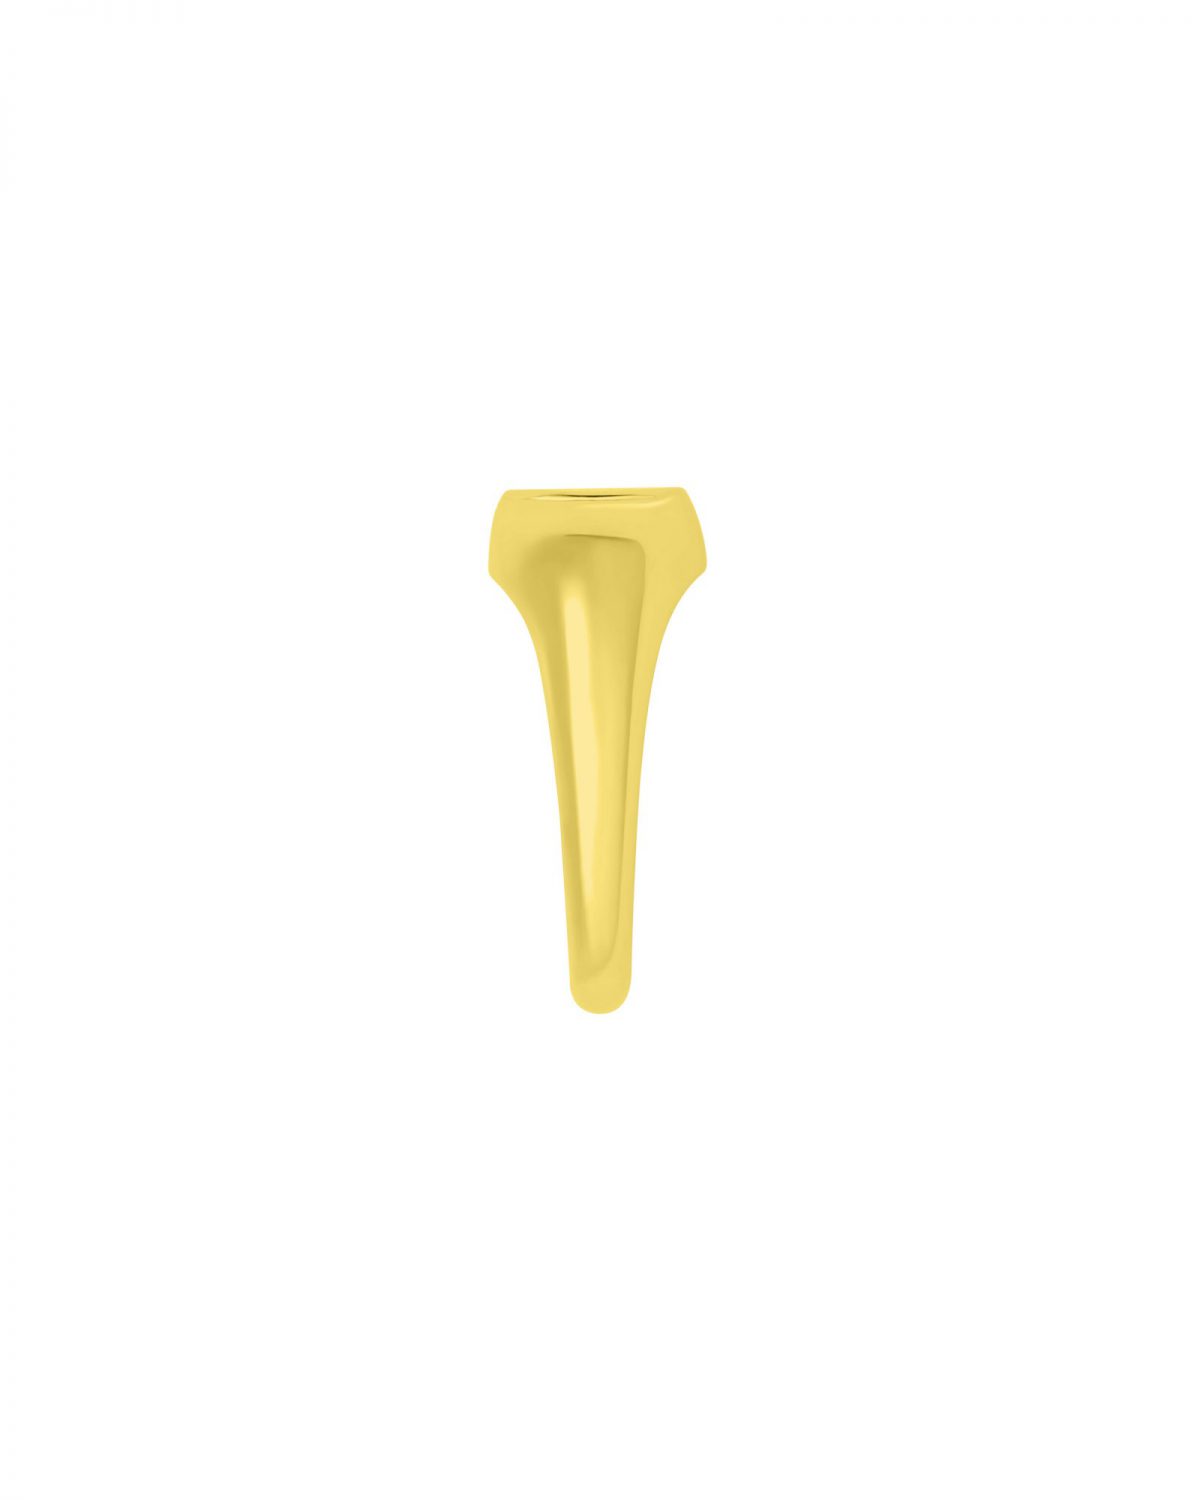 Two-Tone Nate Signet Ring (Gold Ring)